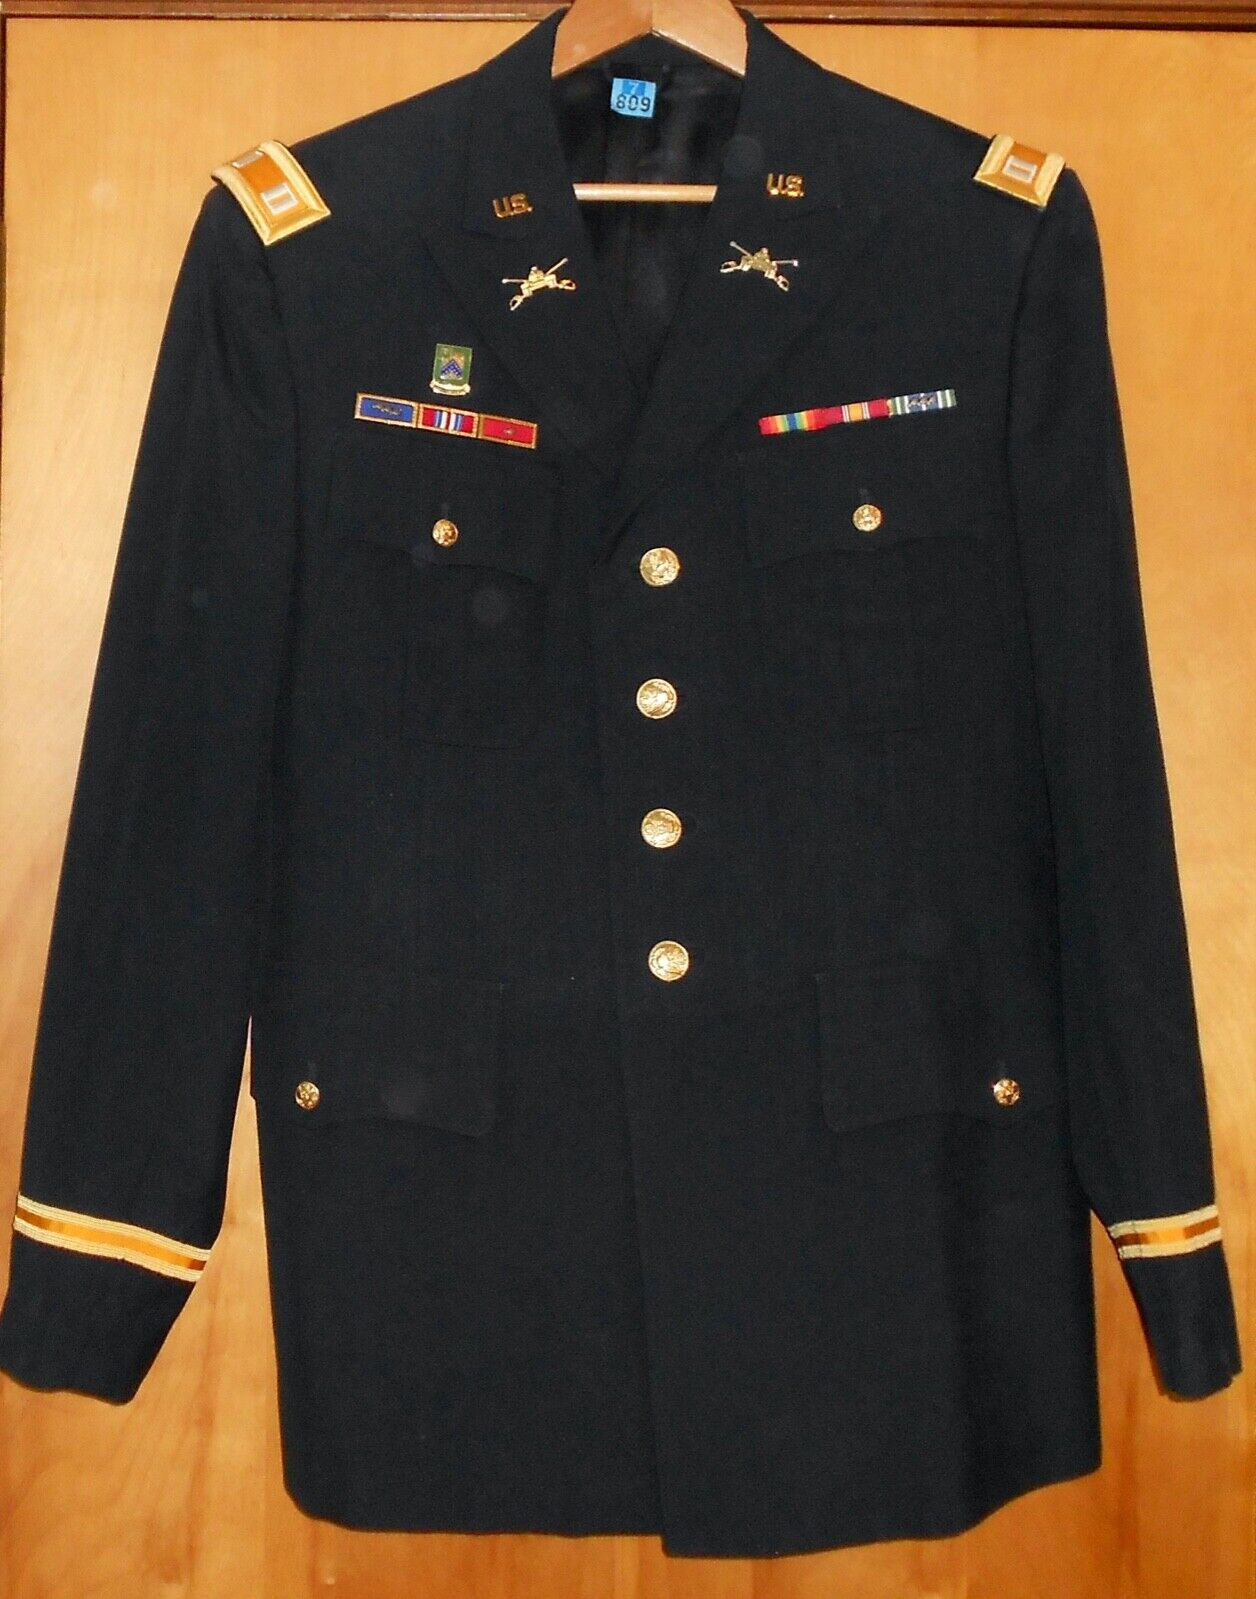 US Army Officer Dress Blue Uniform with Insignia Made to Measure